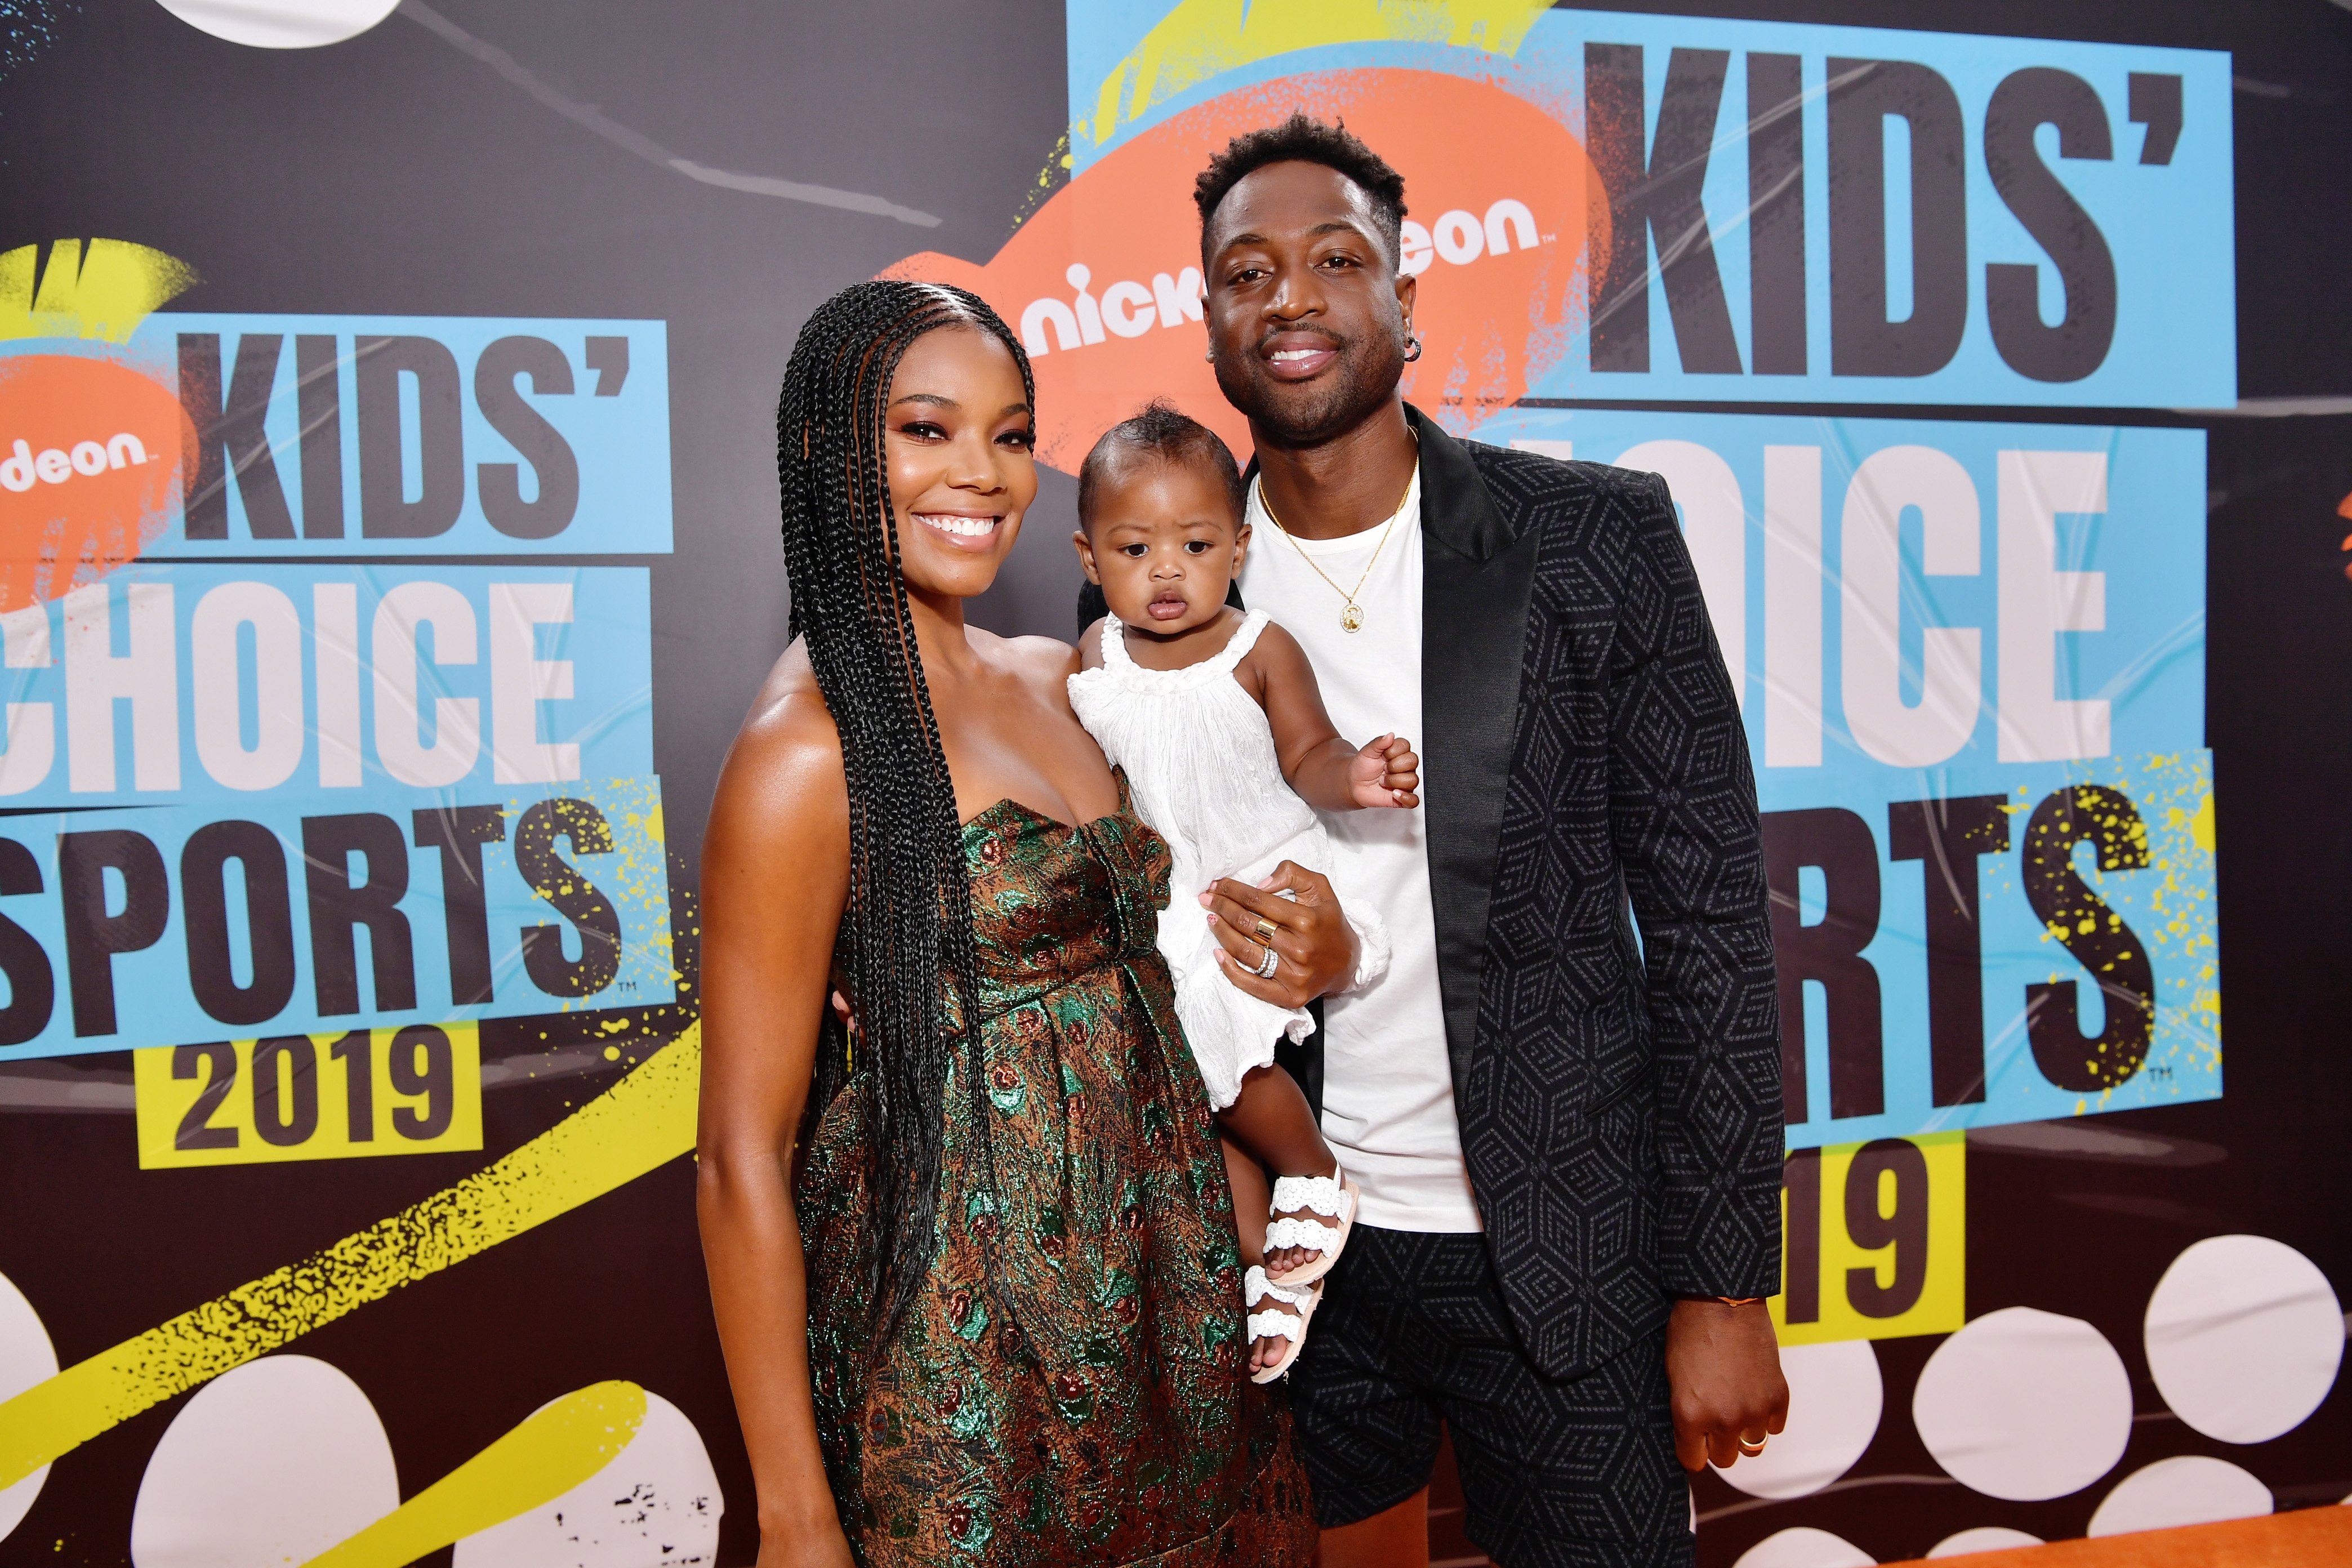 Parents Gabrielle Union and Dwyane Wade with their daughter, Kaavia James attending Nickelodeon KIds' Choice Sports in 2019. | Photo: Getty Images